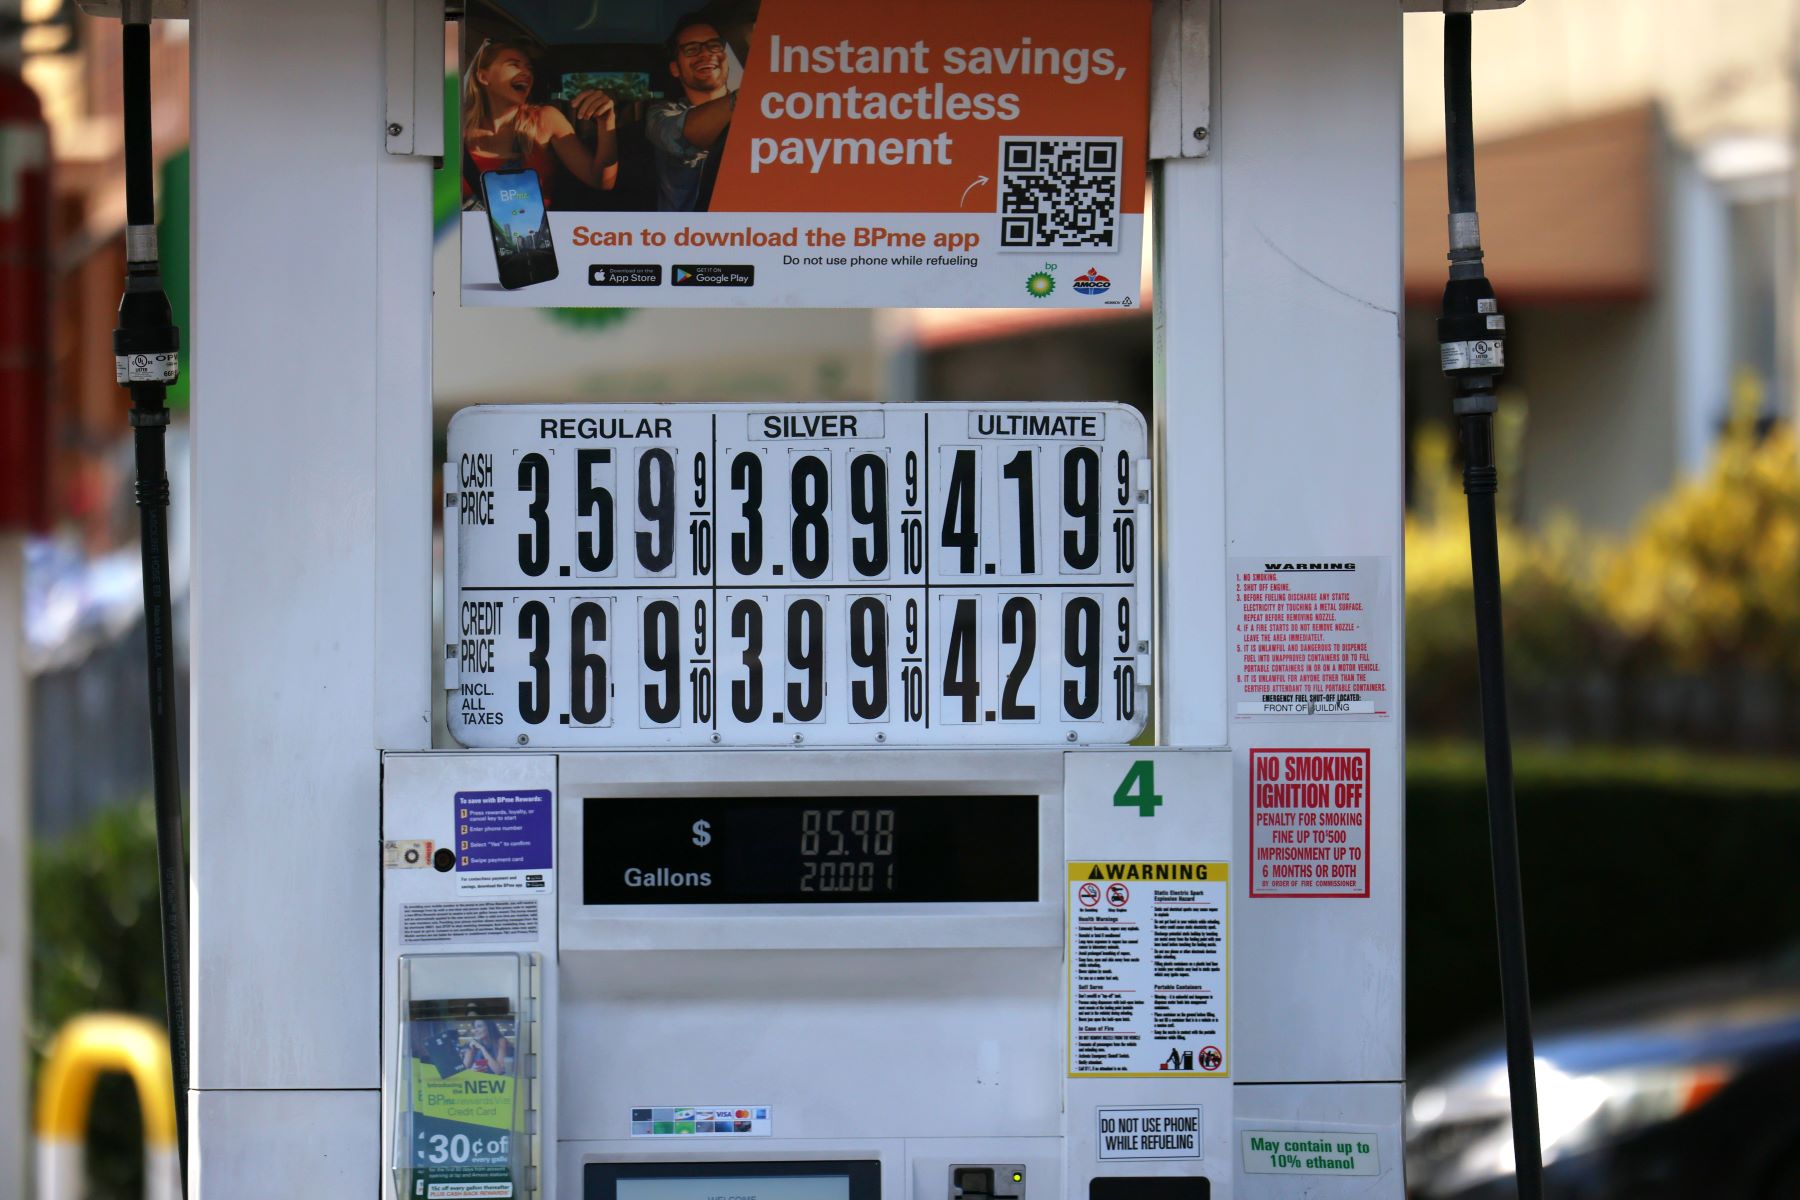 A BP gas station pump in New York City with regular, silver, and ultimate options